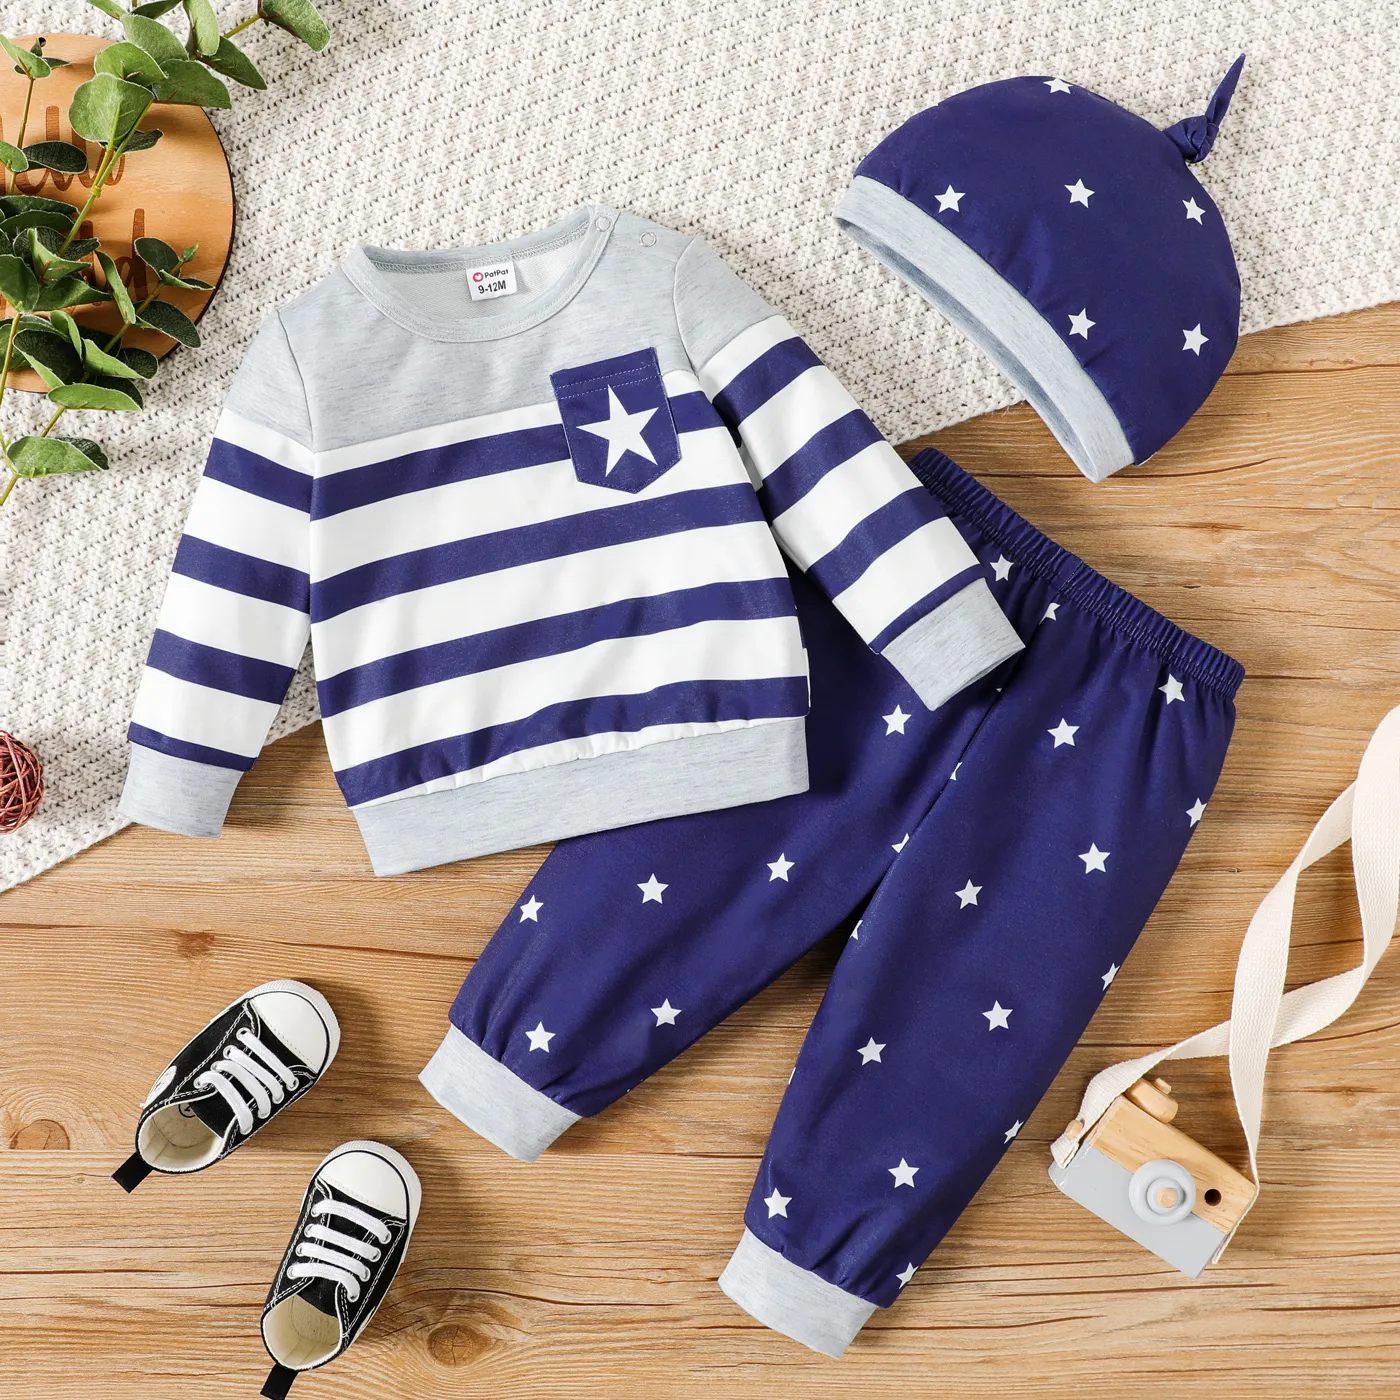 

3pcs Baby Boy Long-sleeve Colorblock Striped Sweatshirt and Allover Stars Print Sweatpants with Hat Set